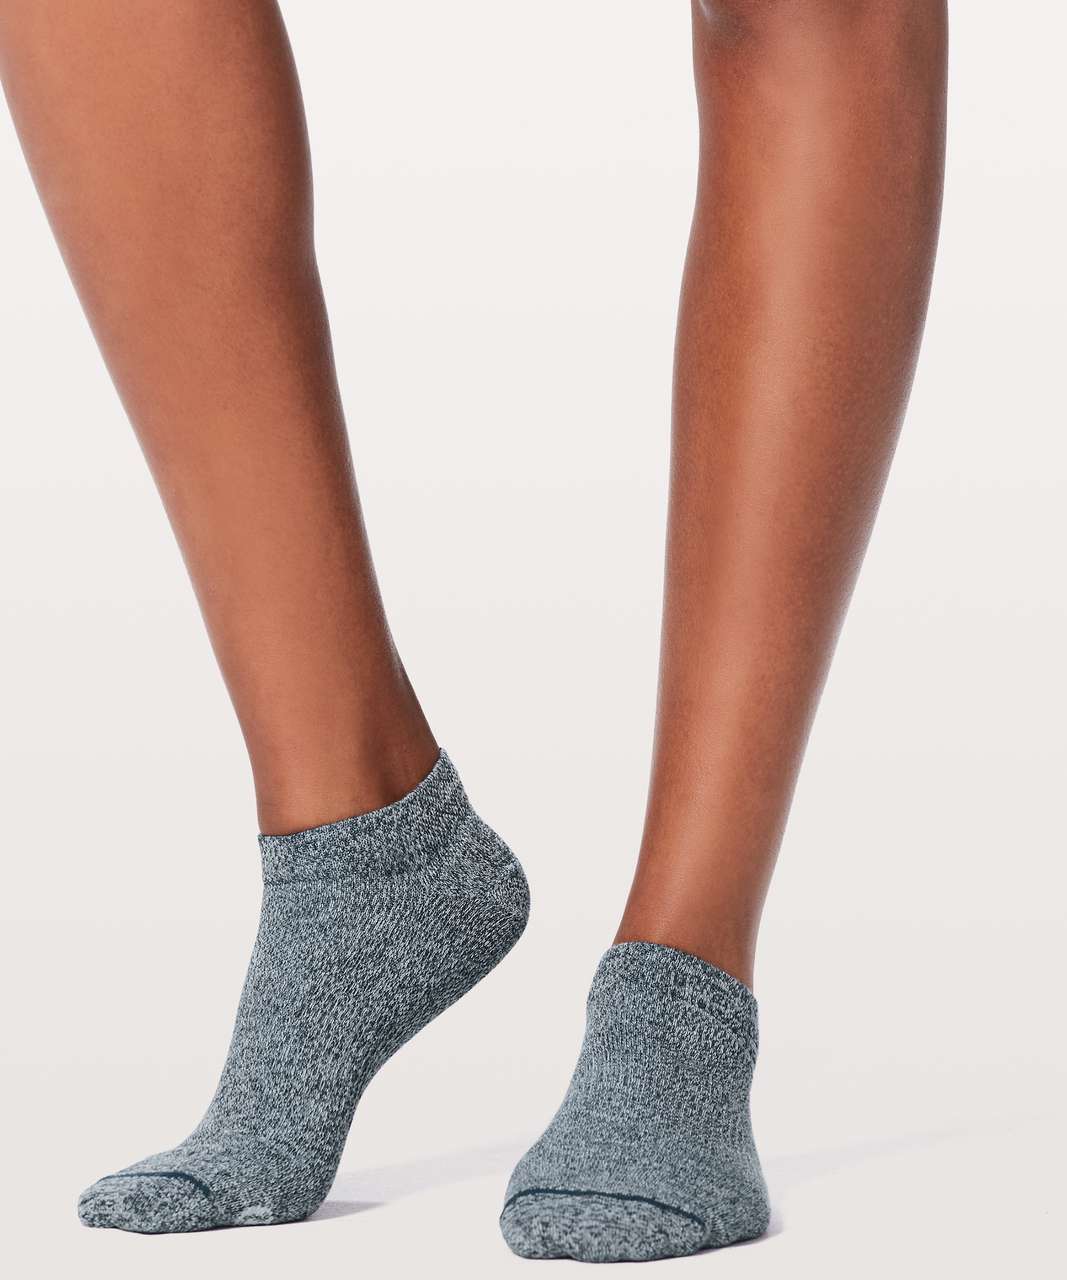 Lululemon All In A Day Sock 3 Pack - Black / White / Heathered True Navy